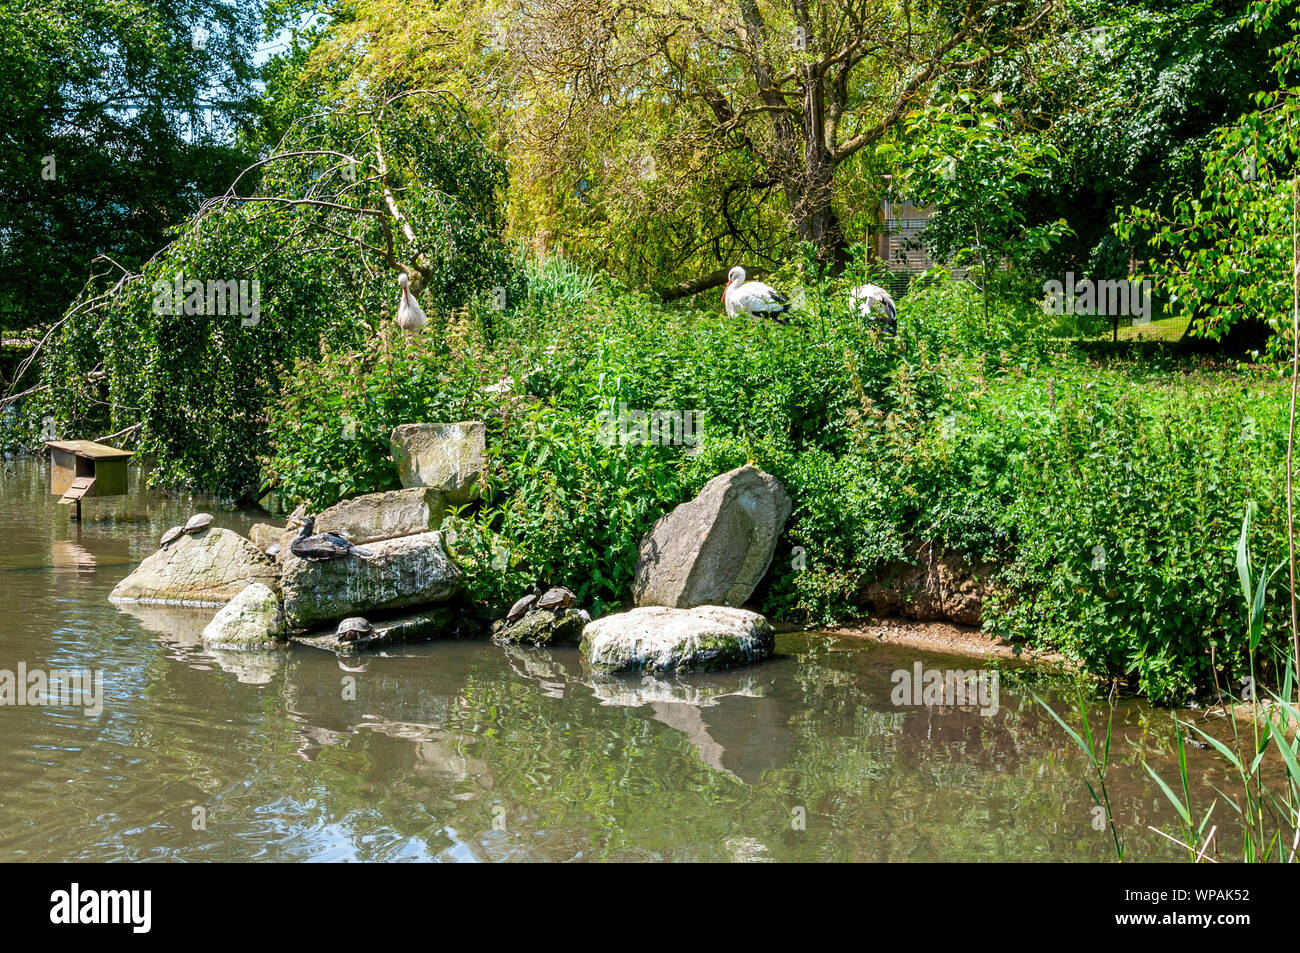 Three white storks stand amongst dense green vegetation at the edge of a pond as a duck and red-eared terrapins sunbathe on rocks at the waters edge Stock Photo